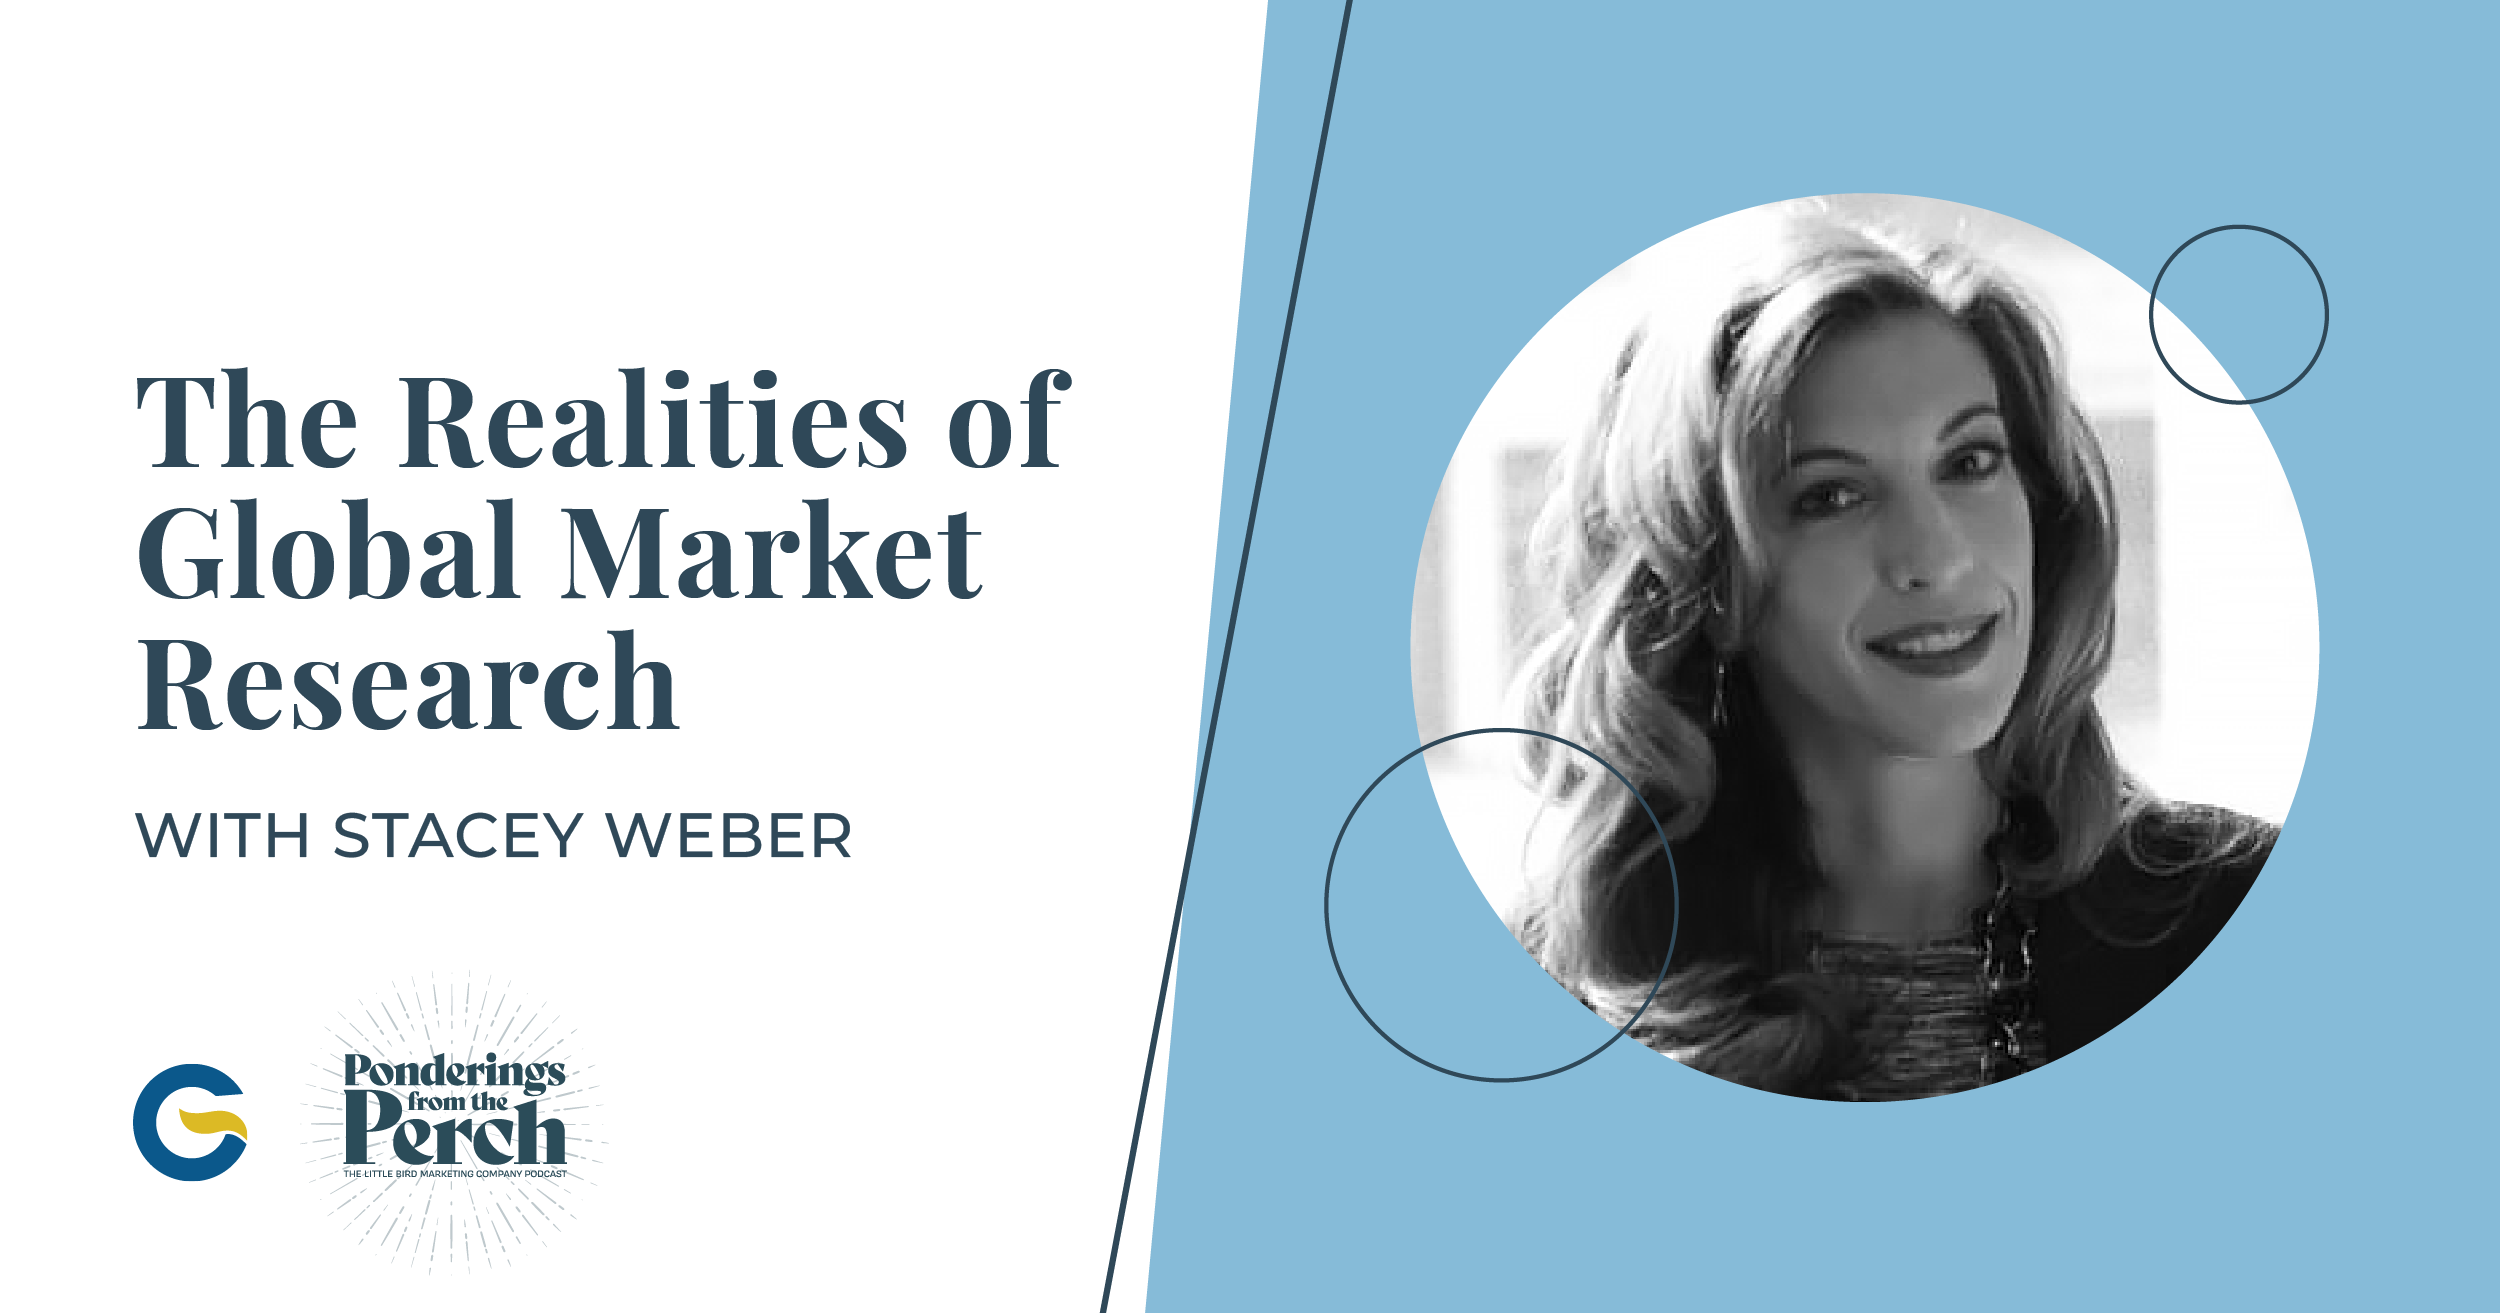 The Future of Global Market Research with Stacey Weber Image